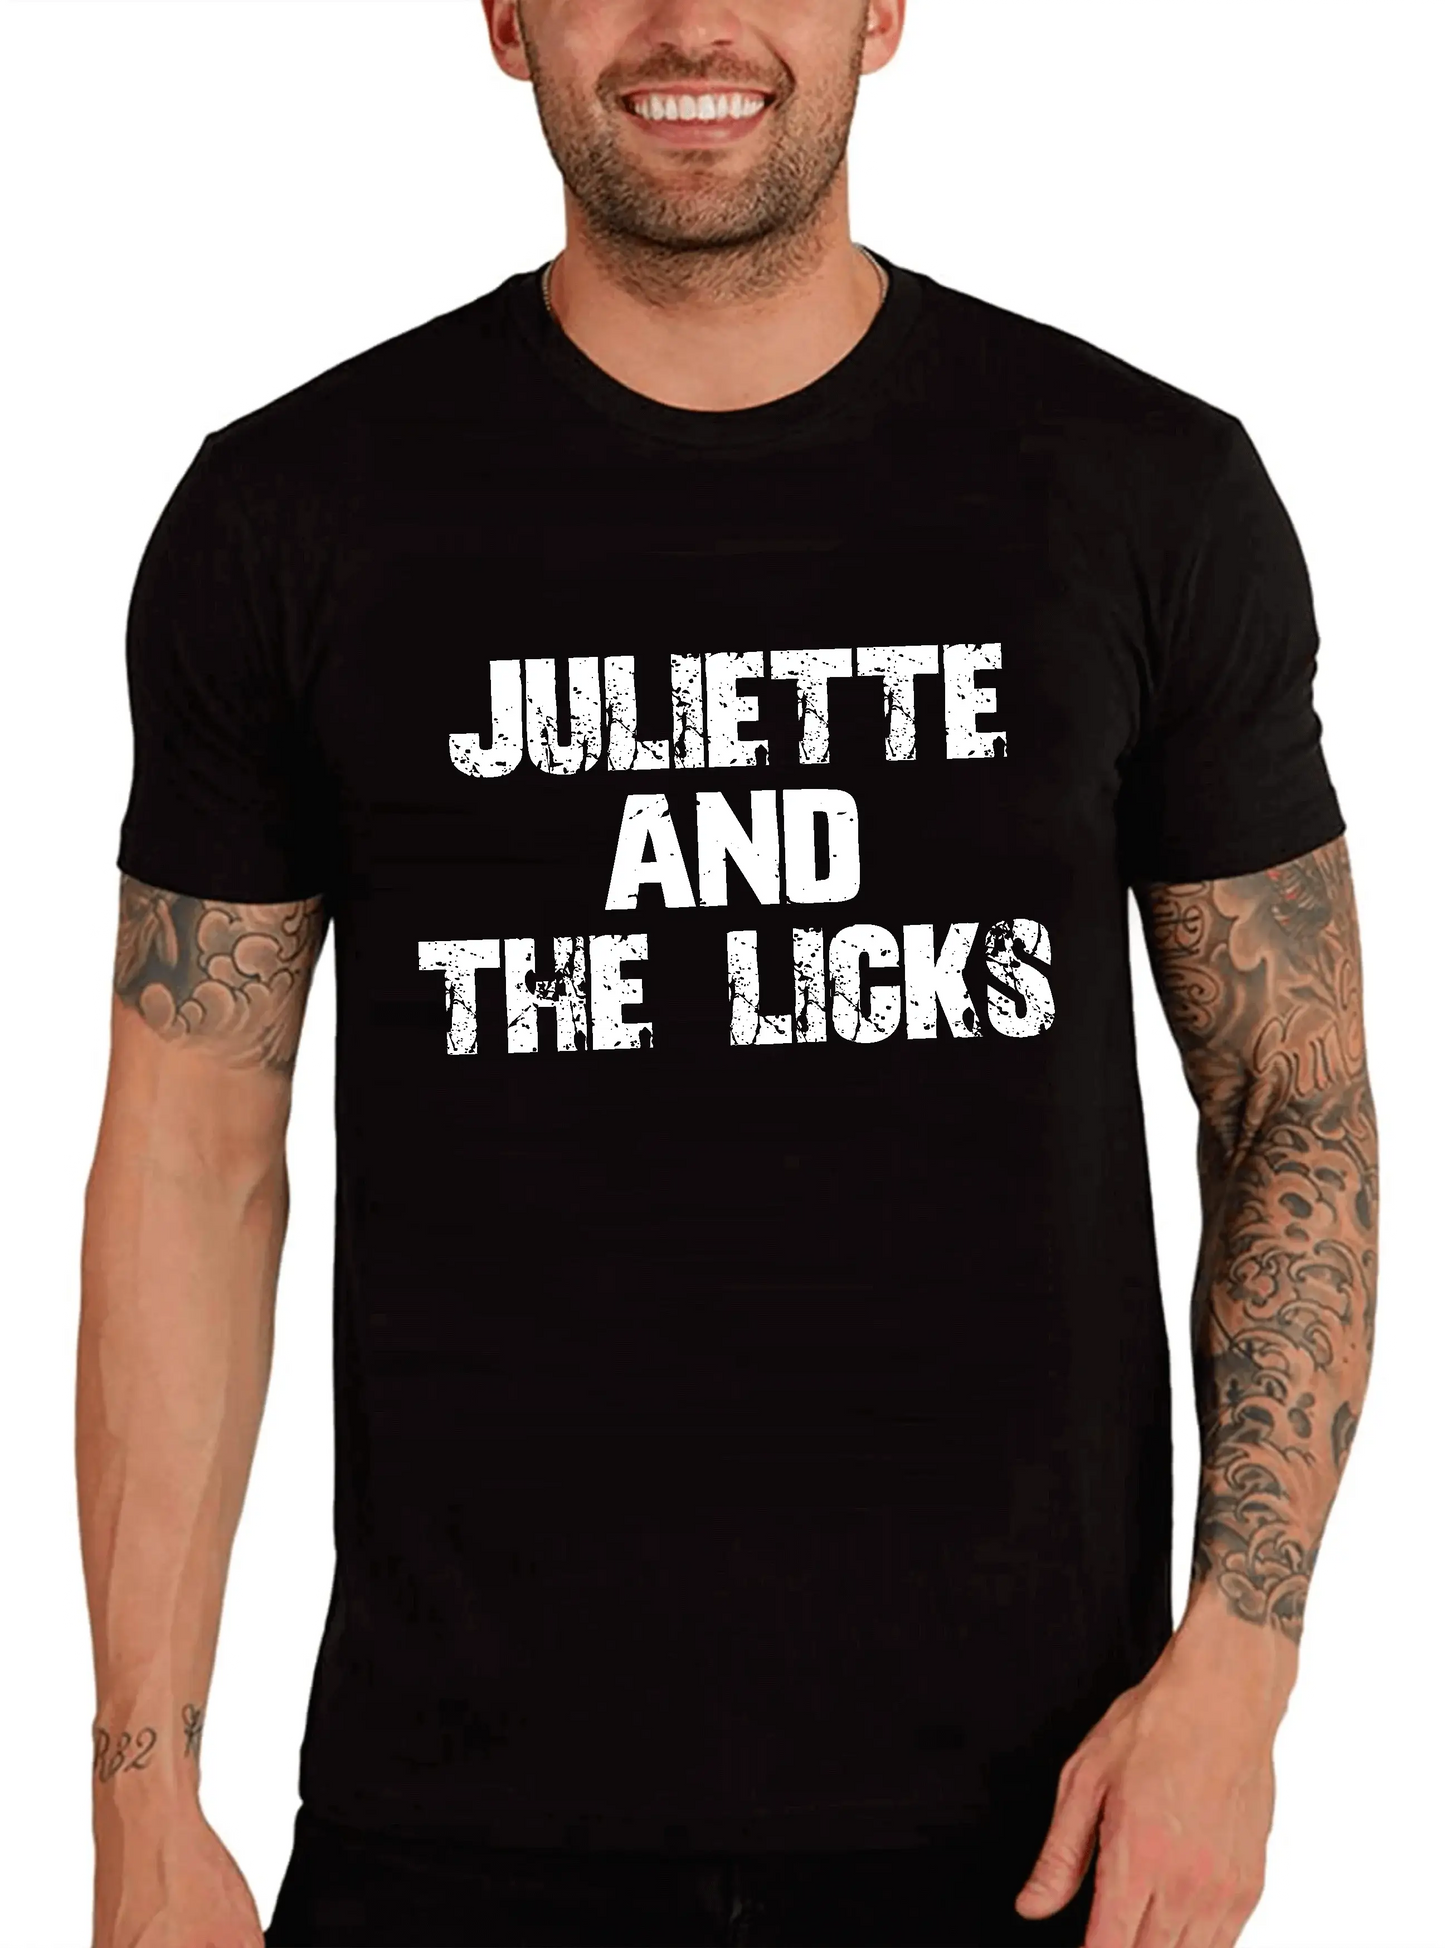 Men's Graphic T-Shirt Juliette And The Licks Eco-Friendly Limited Edition Short Sleeve Tee-Shirt Vintage Birthday Gift Novelty